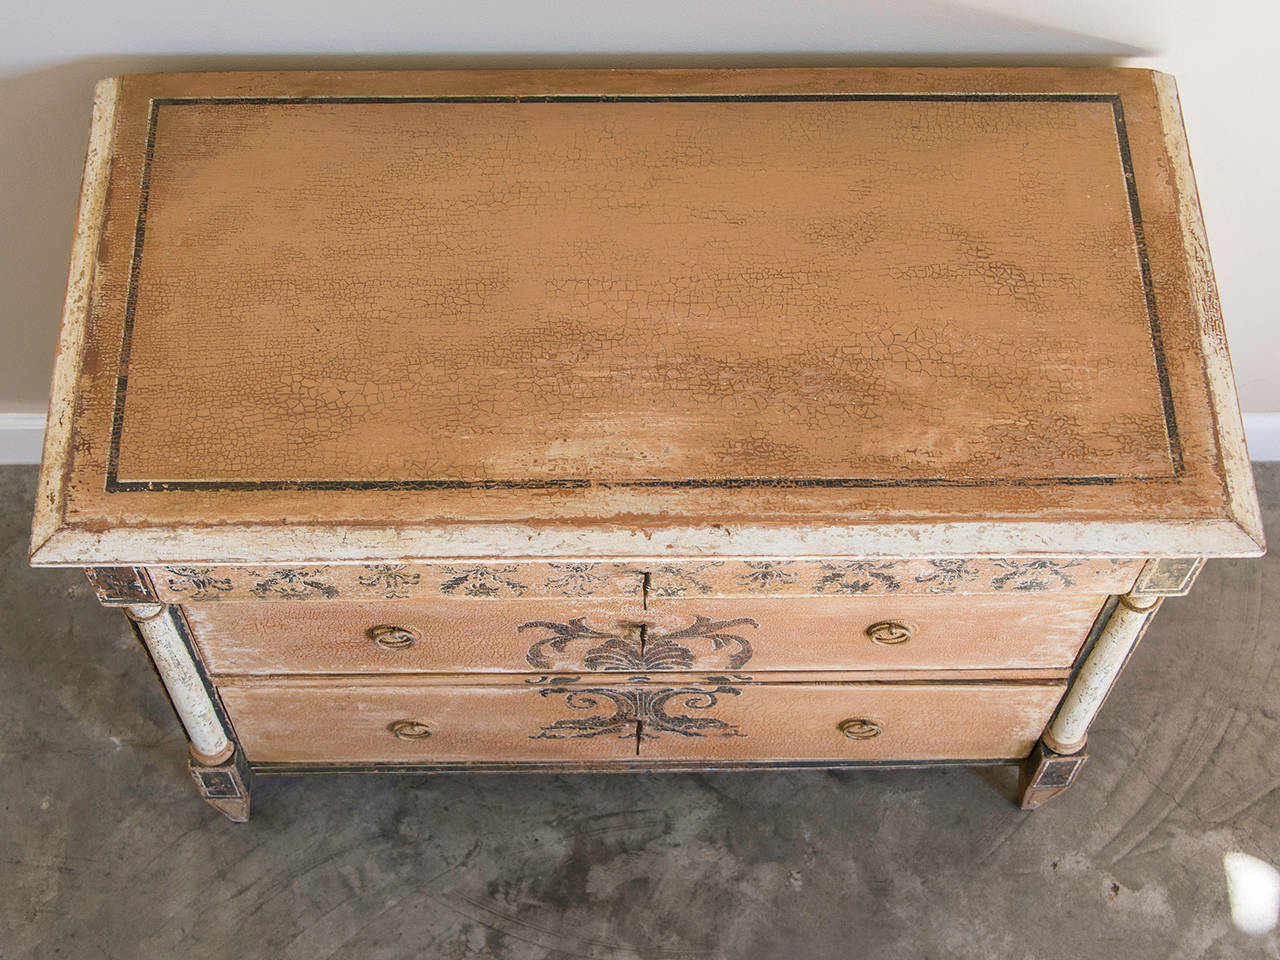 Early 19th Century Empire Period Neoclassical Painted Chest of Drawers, Germany circa 1820